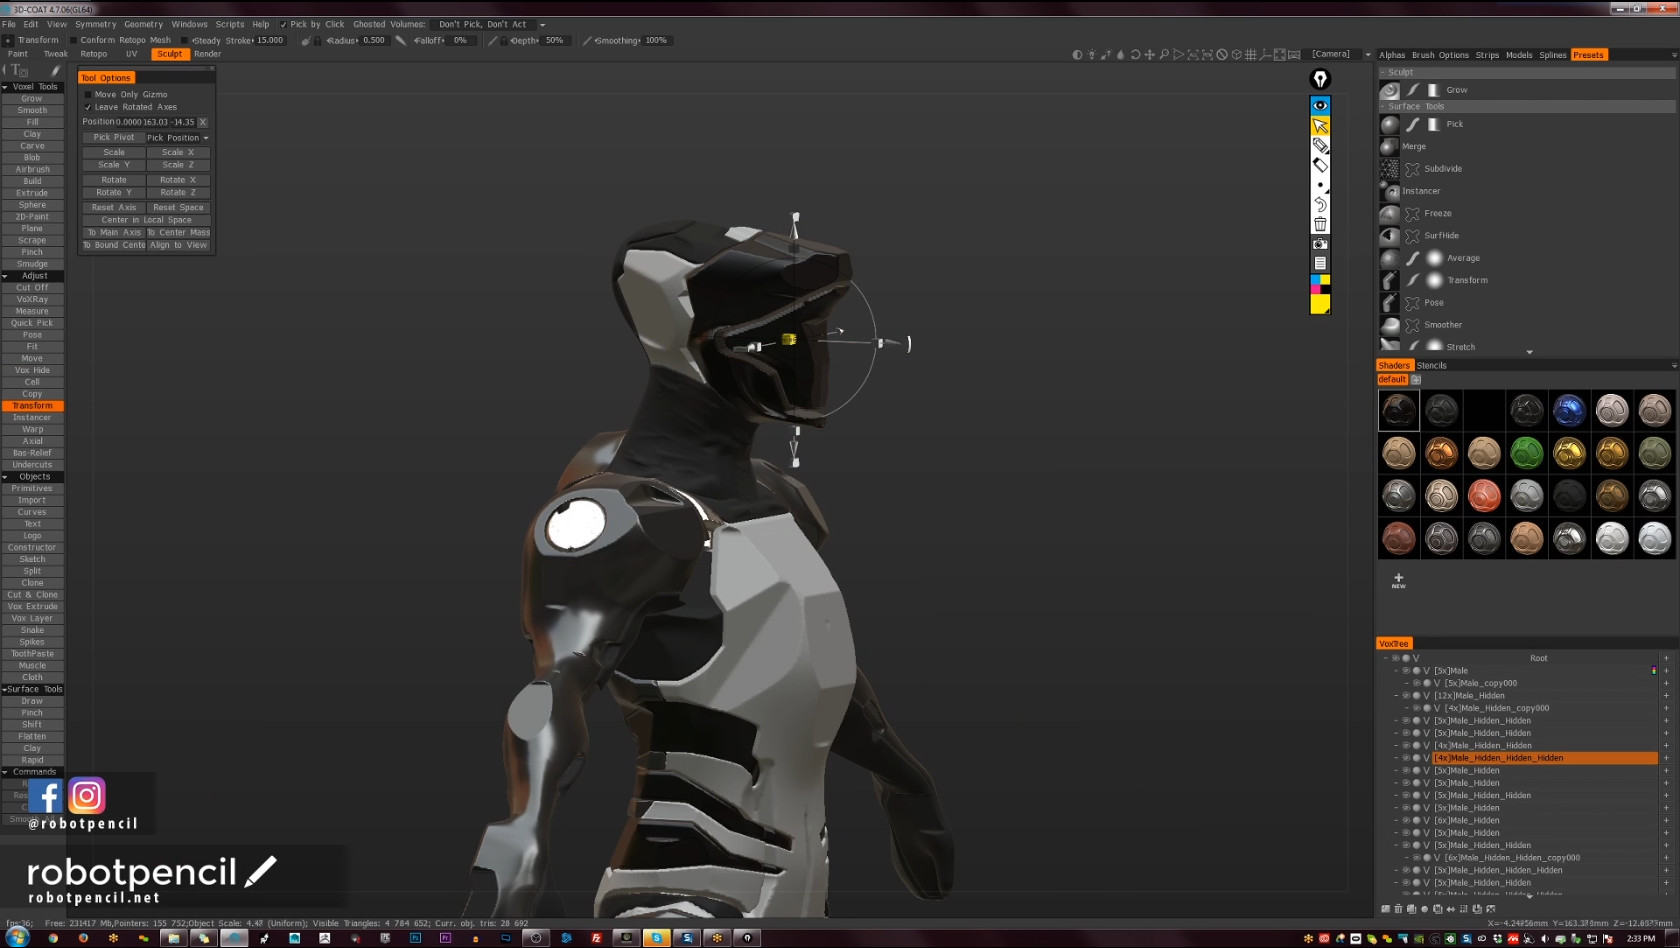 Robotpencil Presents: 3D Coat, Hard Surface Character on Steam